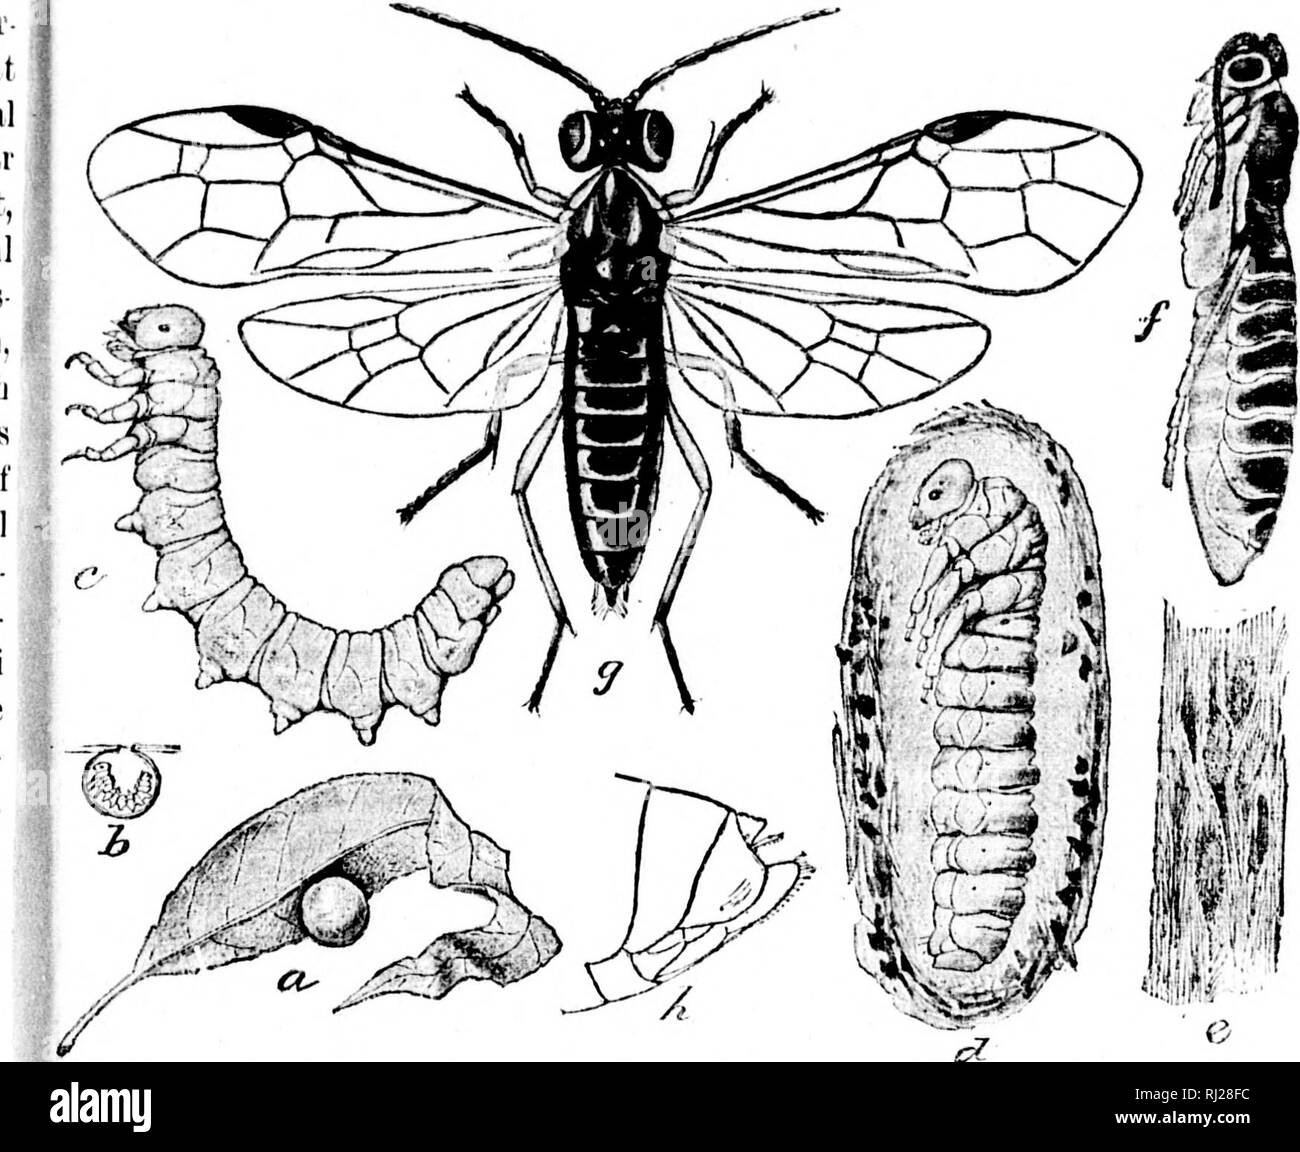 . Revision of the Nematinae of North America [microform] : a subfamily of leaf-feeding Hymenoptera of the family Tenthredinidae. Hymenoptera; Insects; Hyménoptères; Insectes. 33 stripe on eacli il segments ol&quot; Uf, large spot ik; outer two e and all tlic owish brown: lostii and stigma very light, almost liyalino, tlu' hitter with narrow §)rovn bordering line. Mdh:—As in female, except that the occiput is inliiscated and the luesothorax is entirely black. One femah' and one male. Michigan and District of Columbia (.'). |((.oll. U, S. Nat. Mus.) *!&gt;. Pontania kincaidi new species. Fnuale Stock Photo